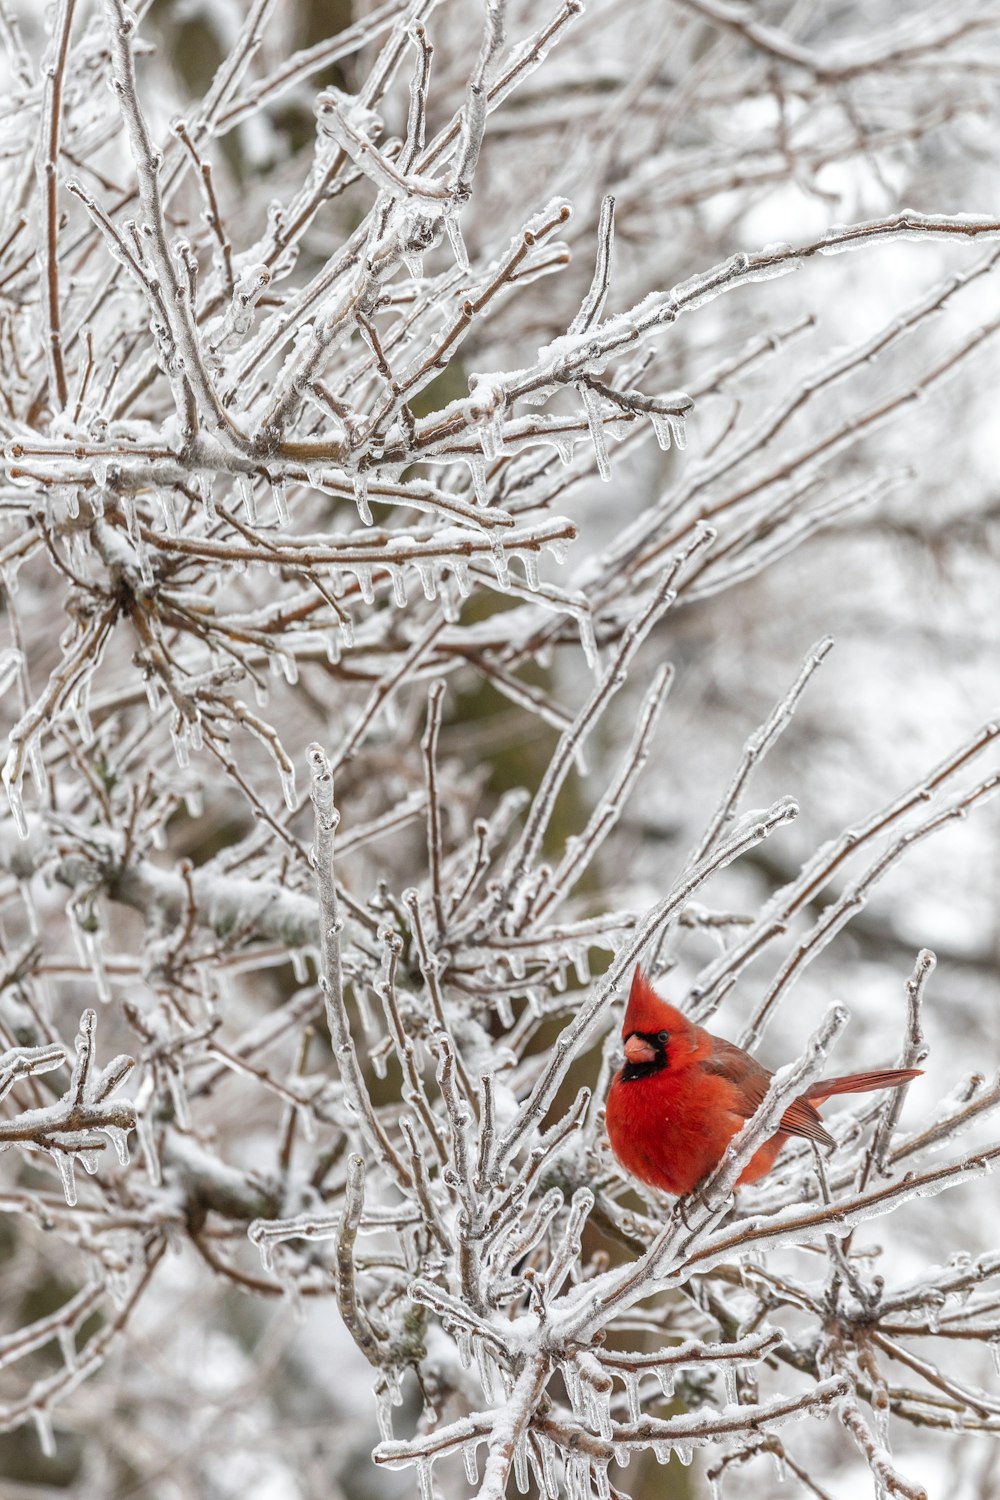 red cardinal bird perched on brown tree branch during daytime